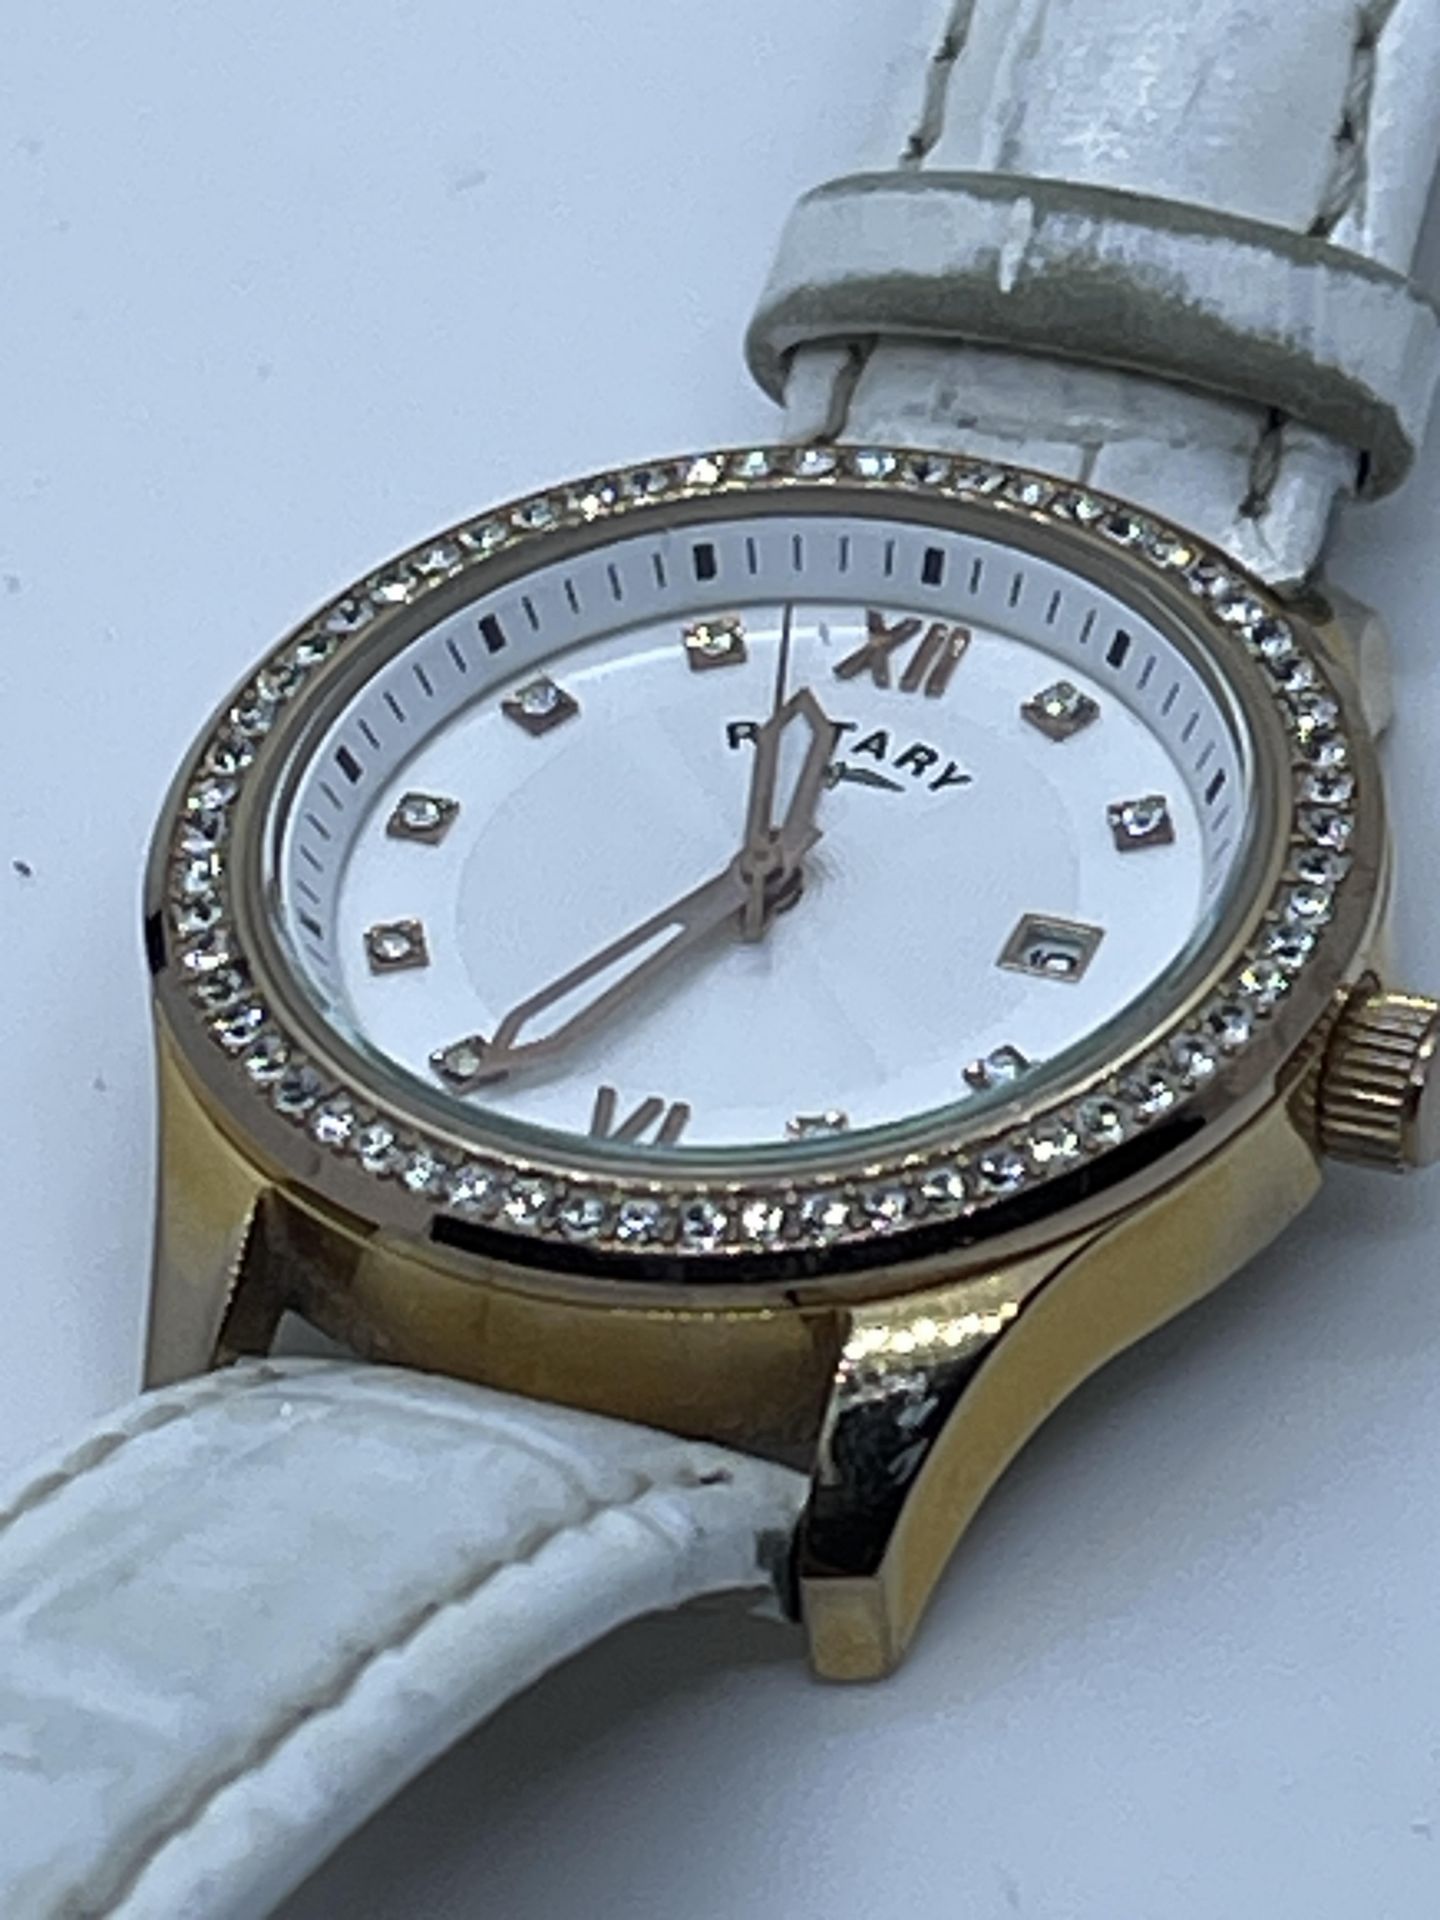 Rotary watch return/spares/lost property from a private jet charter with no reserve - Image 2 of 3